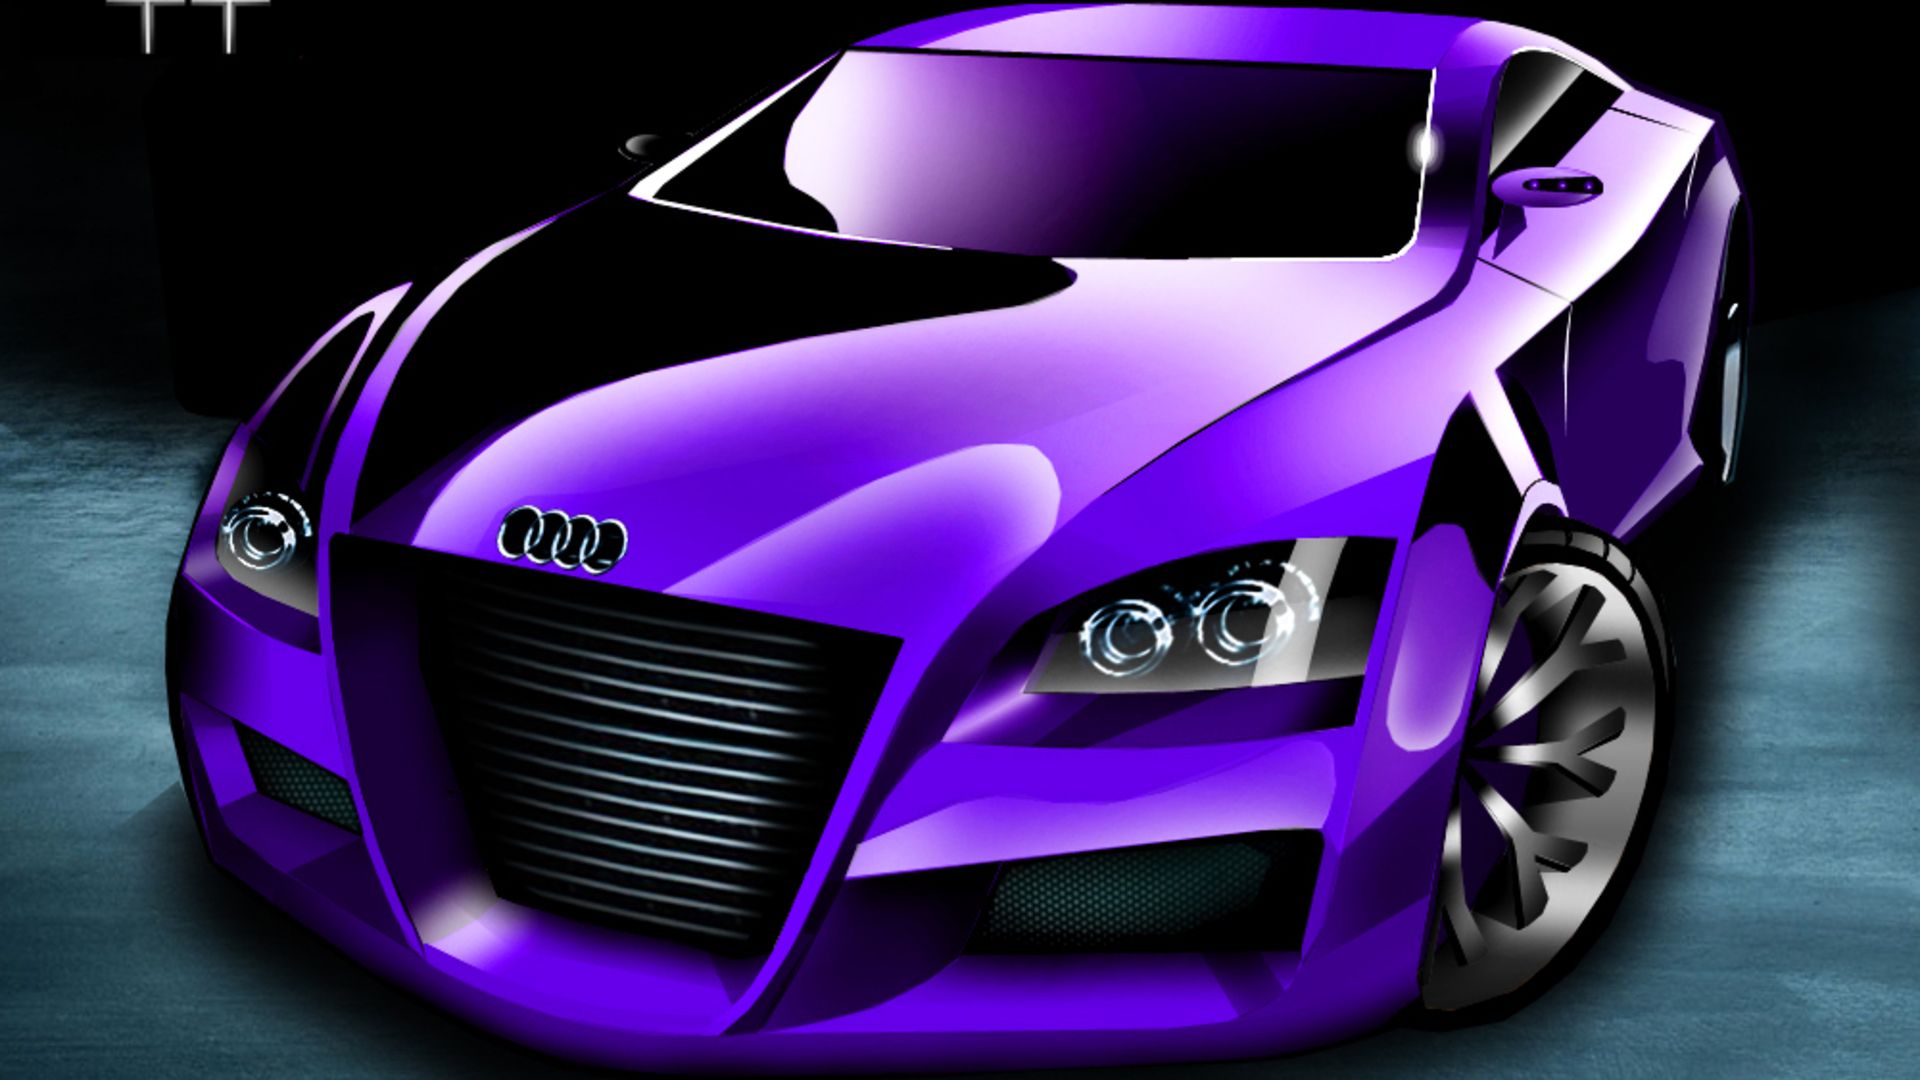 Wallpapers Of Hottest Cars Of - Top 10 World Best Cars - HD Wallpaper 